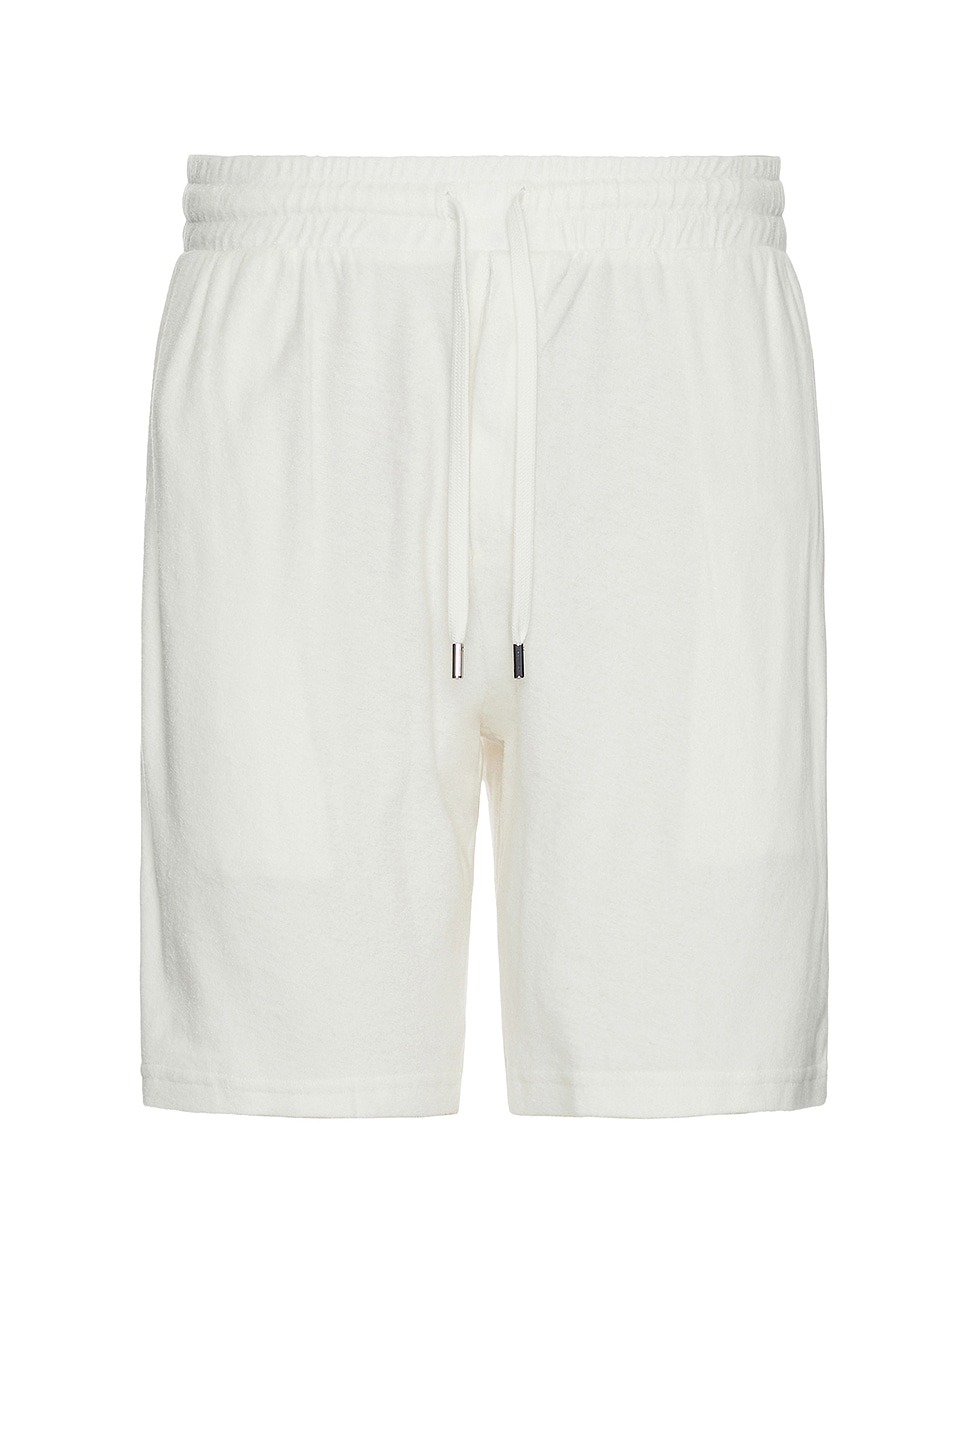 Augusto Terry Cotton Blend Shorts in Ivory